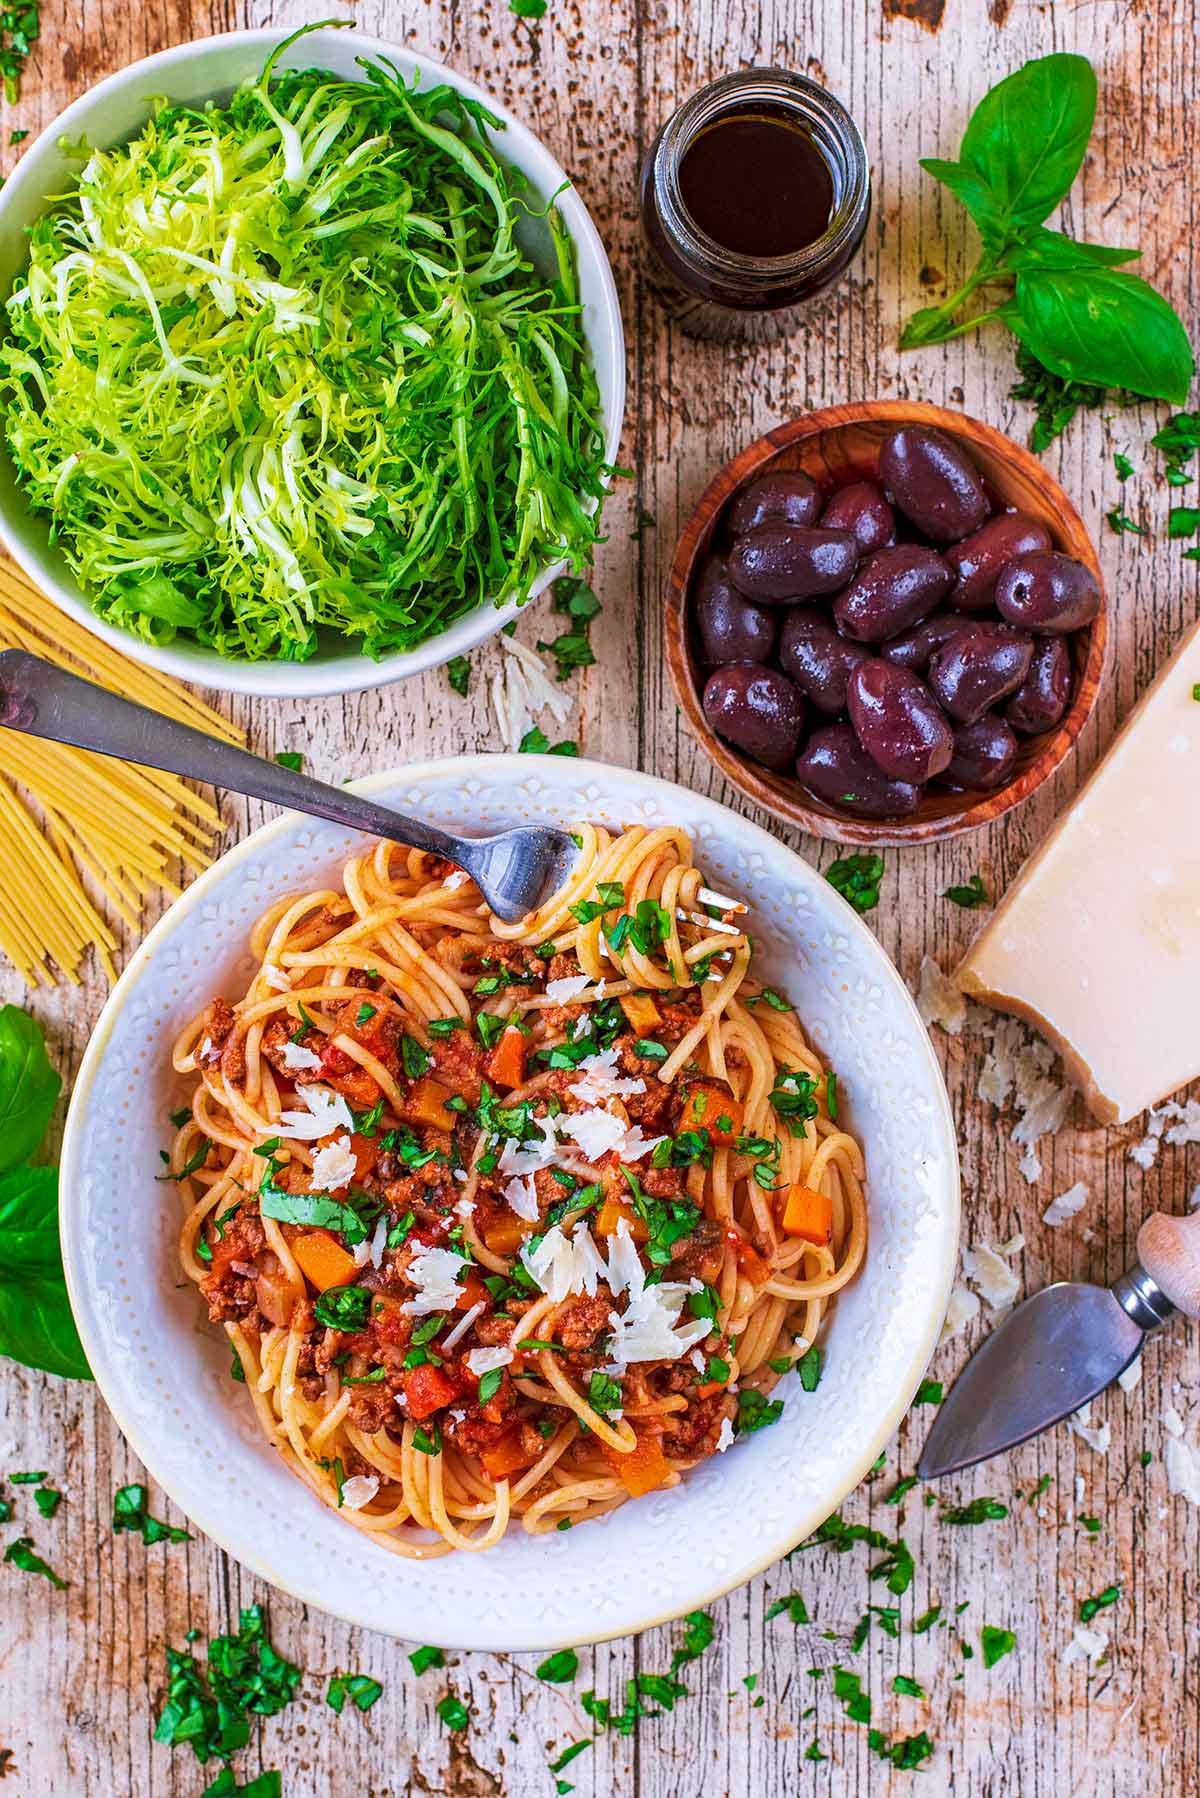 Spaghetti Bolognese with a bowl of salad and some black olives.